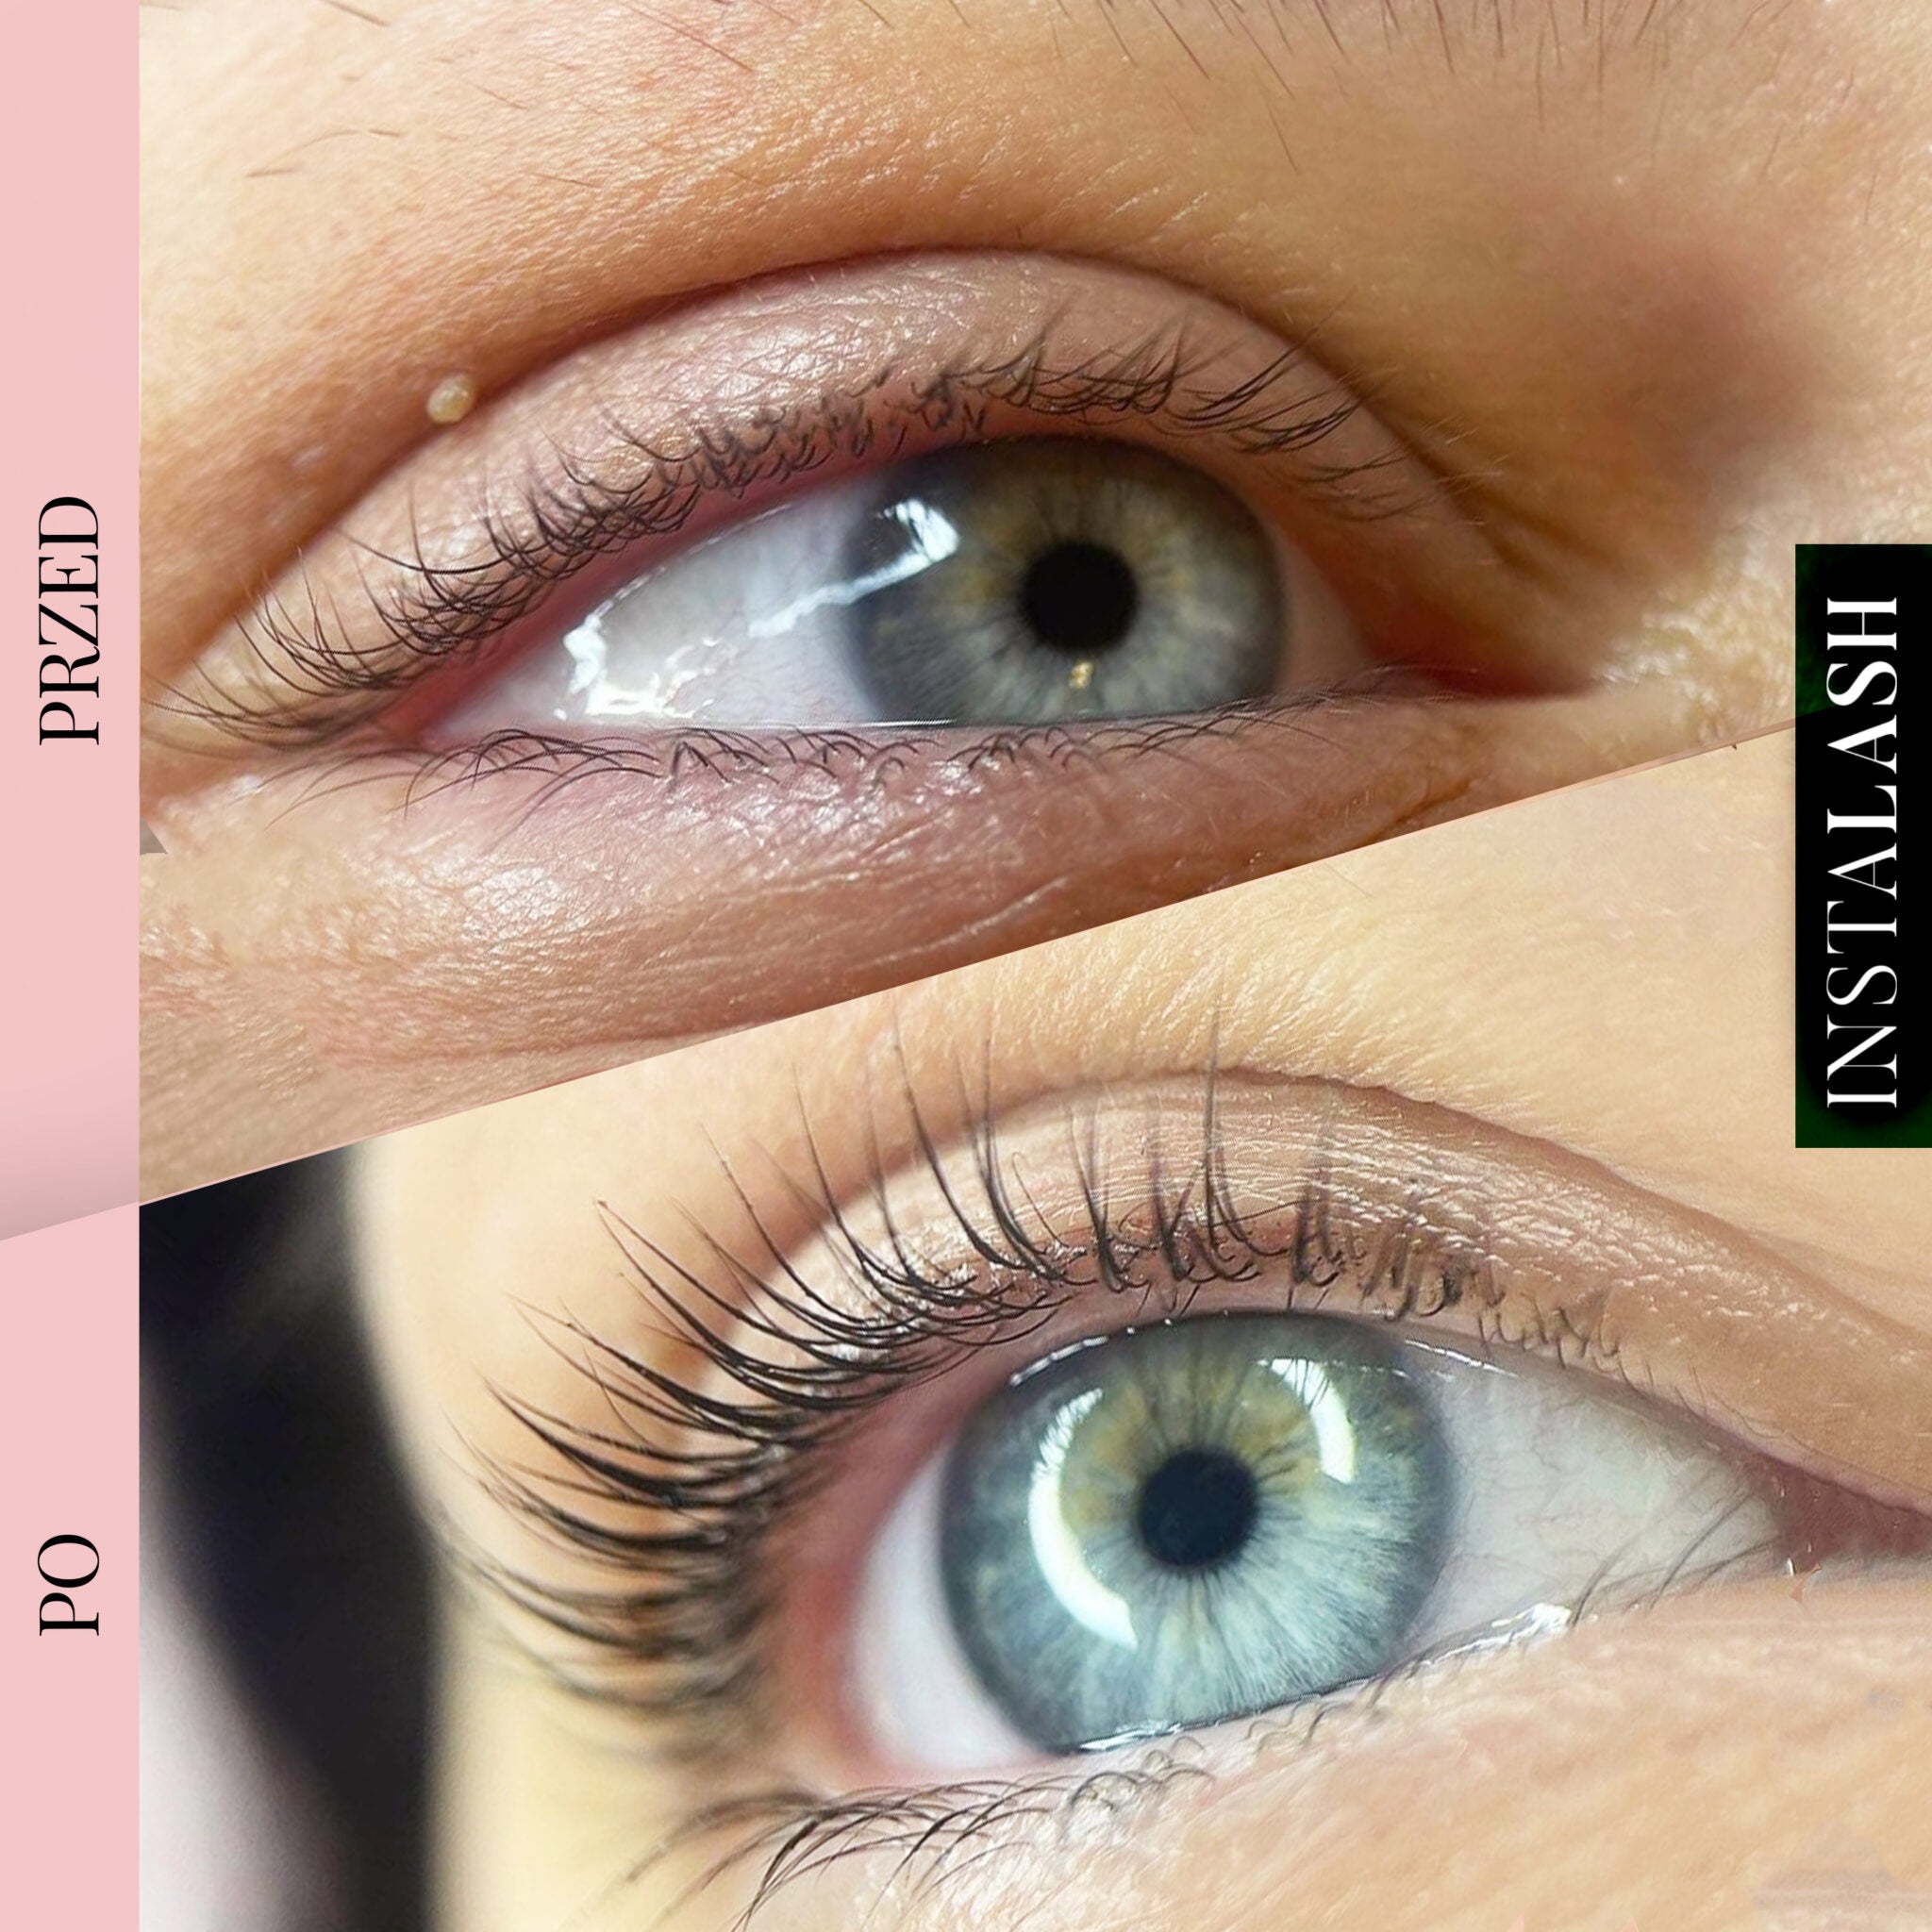 Before and after using Instalash LashBOOST SERUM – Lash & Brow Growth & Conditioning Serum